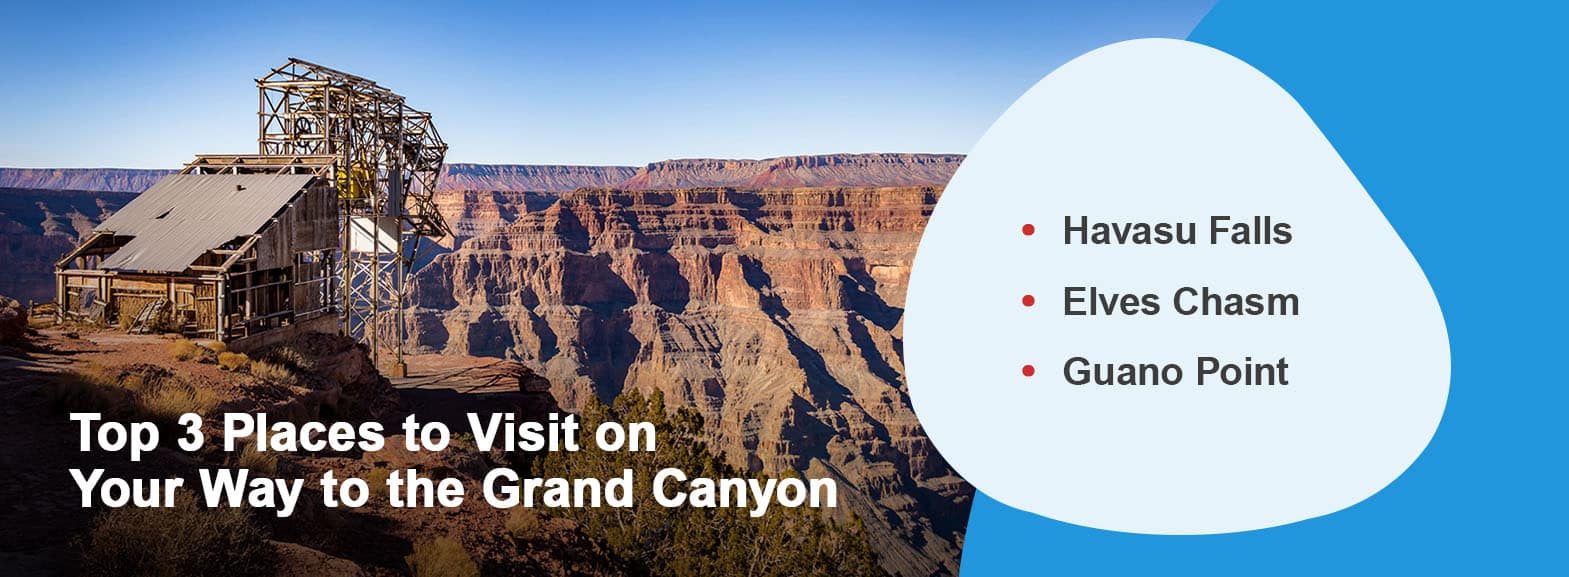 Top 3 Places to Visit on Your Way to the Grand Canyon 